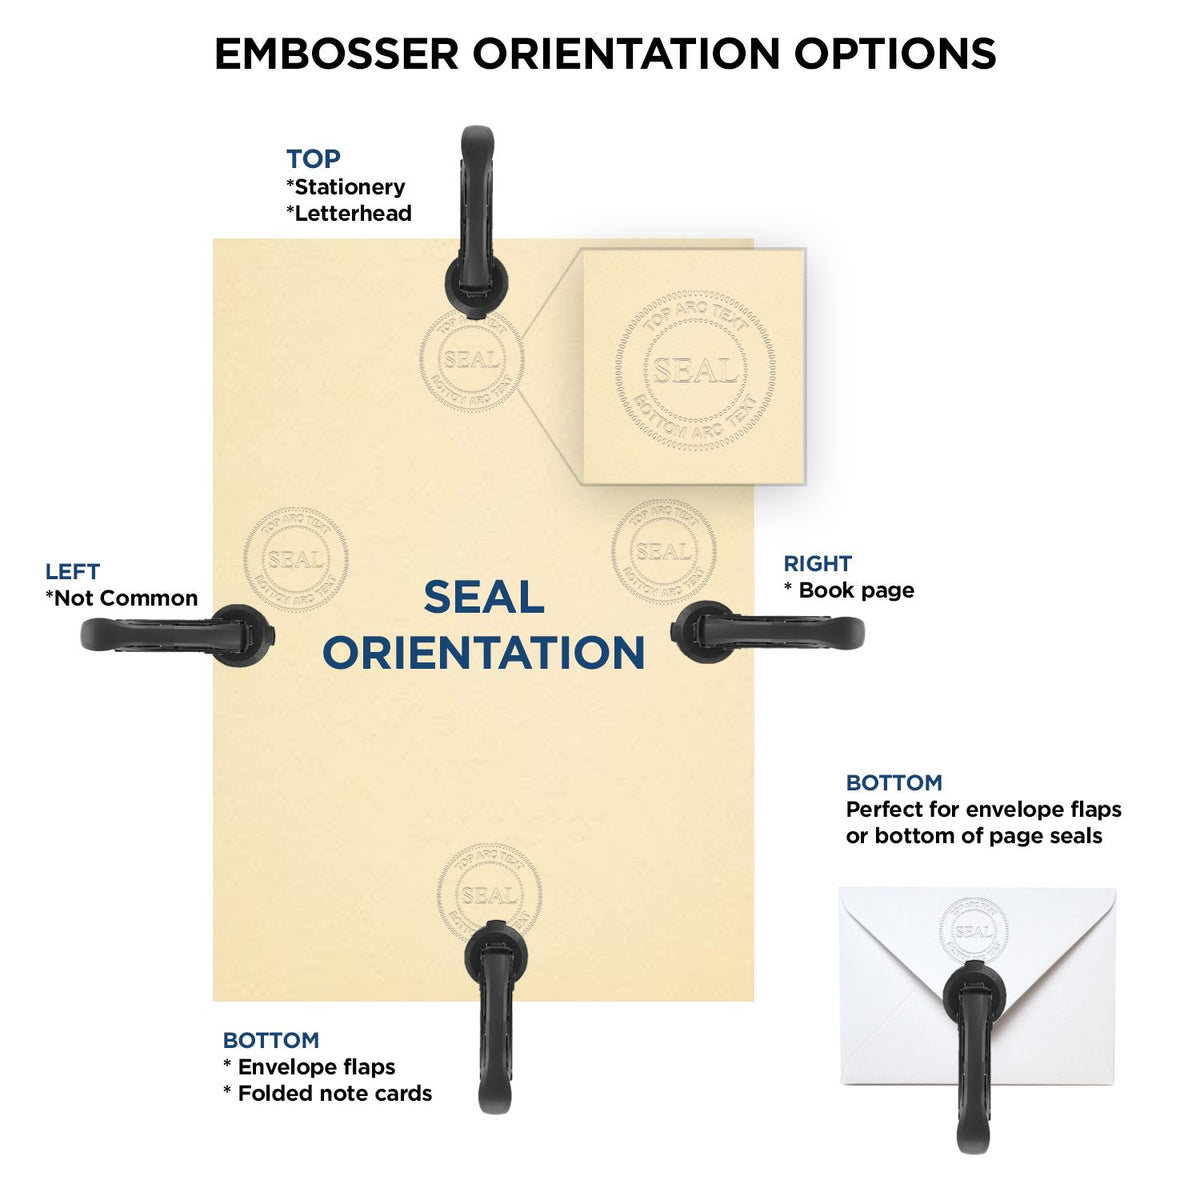 An infographic for the Heavy Duty Cast Iron Texas Engineer Seal Embosser showing embosser orientation, this is showing examples of a top, bottom, right and left insert.